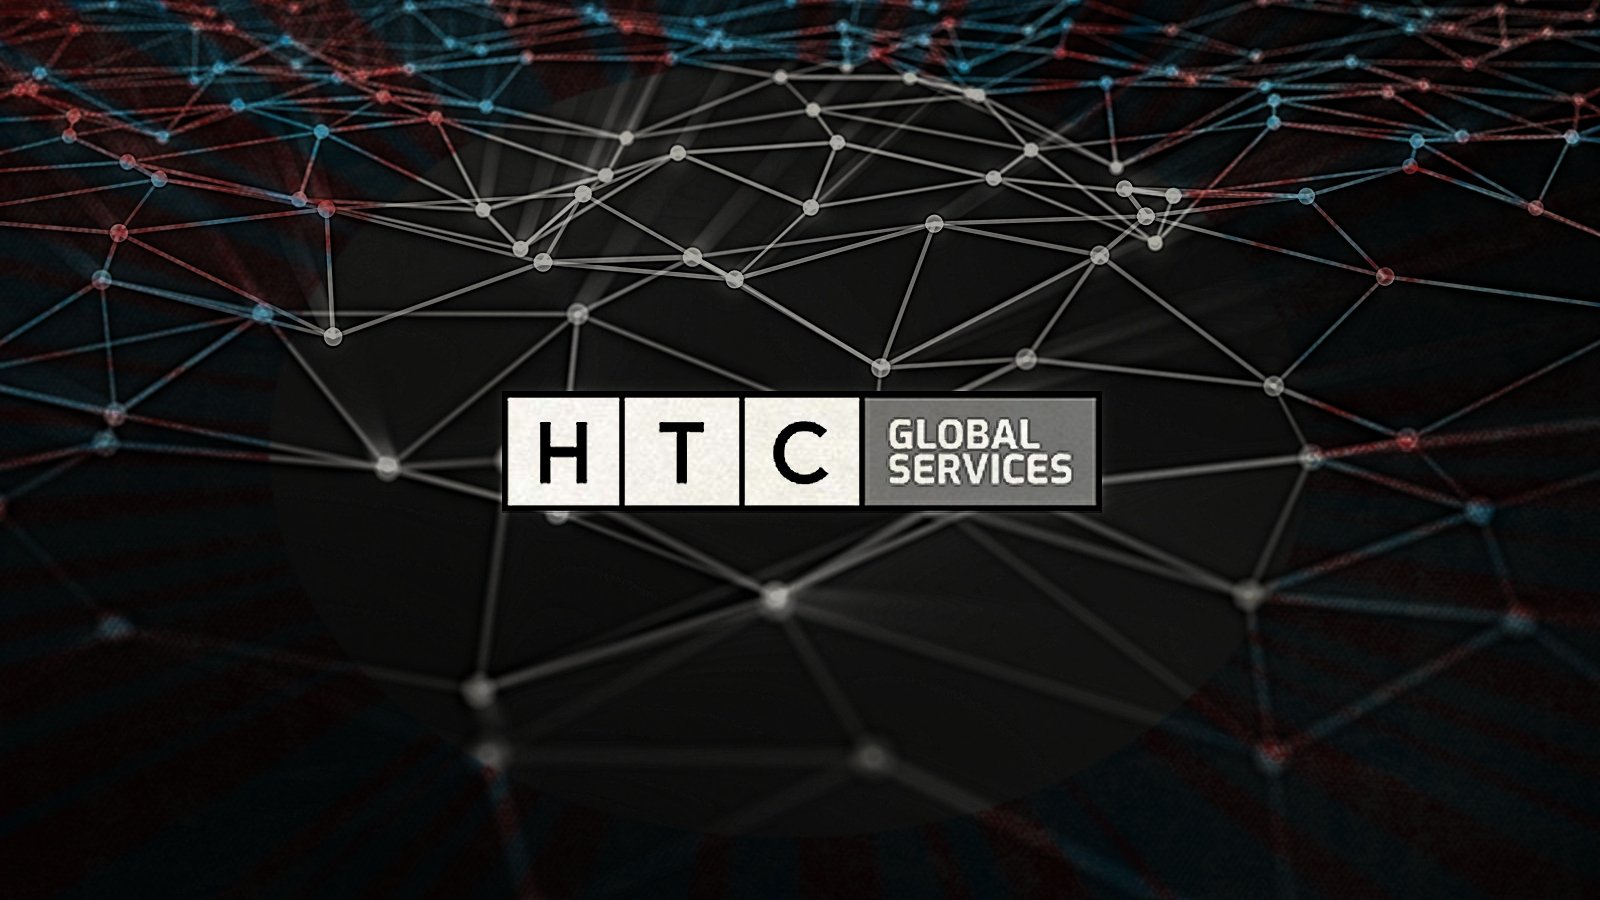 HTC Global Services confirms cyberattack after data leaked online